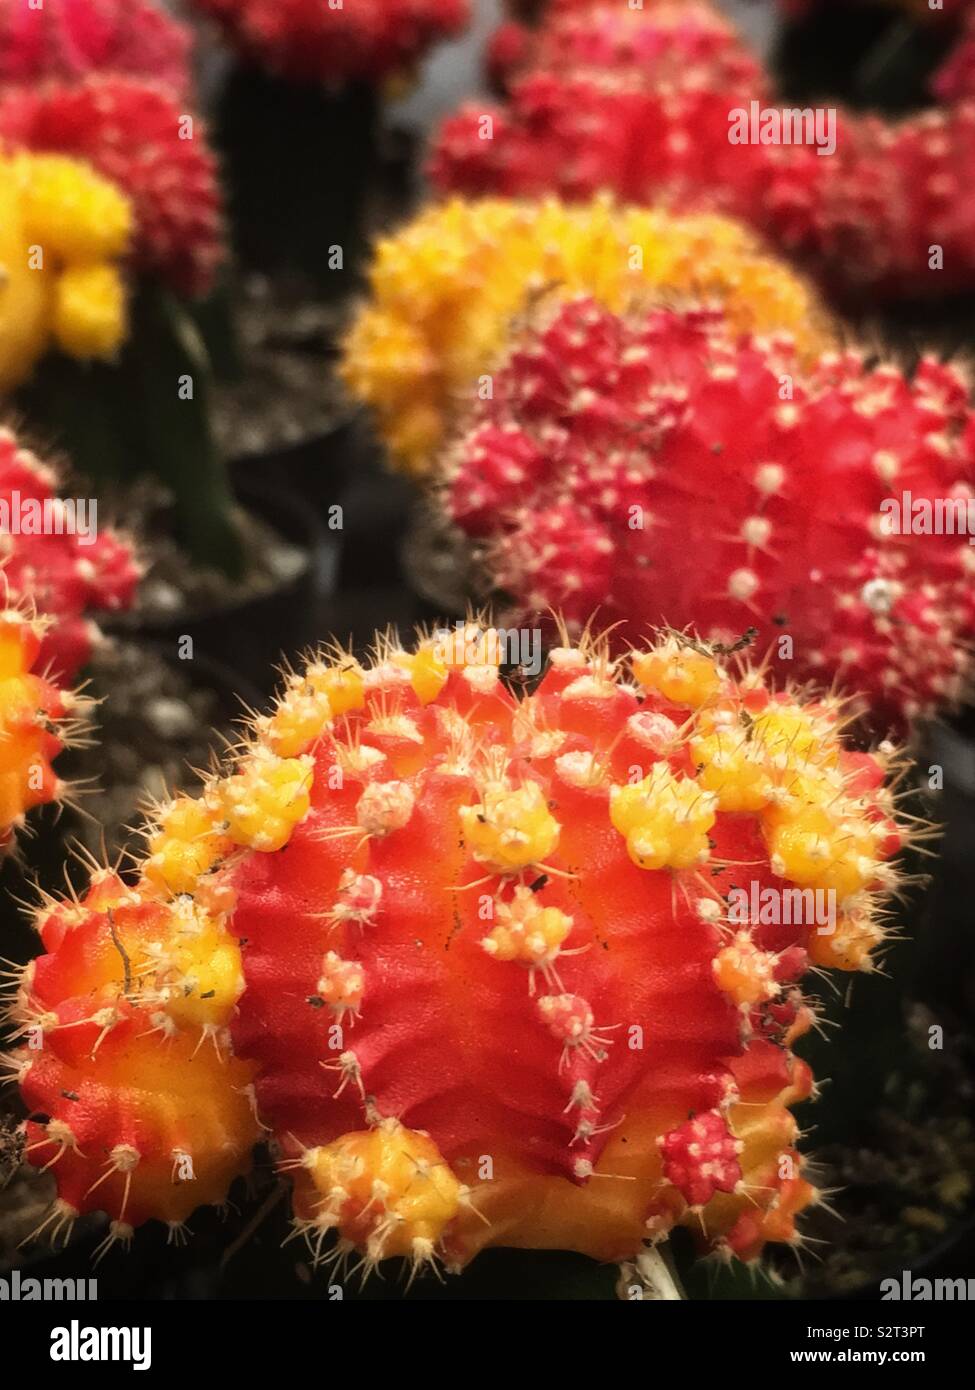 Red gymnocalycium flower buds grafted onto the colorful ruby ball cactus and the red cap cactus. Stock Photo